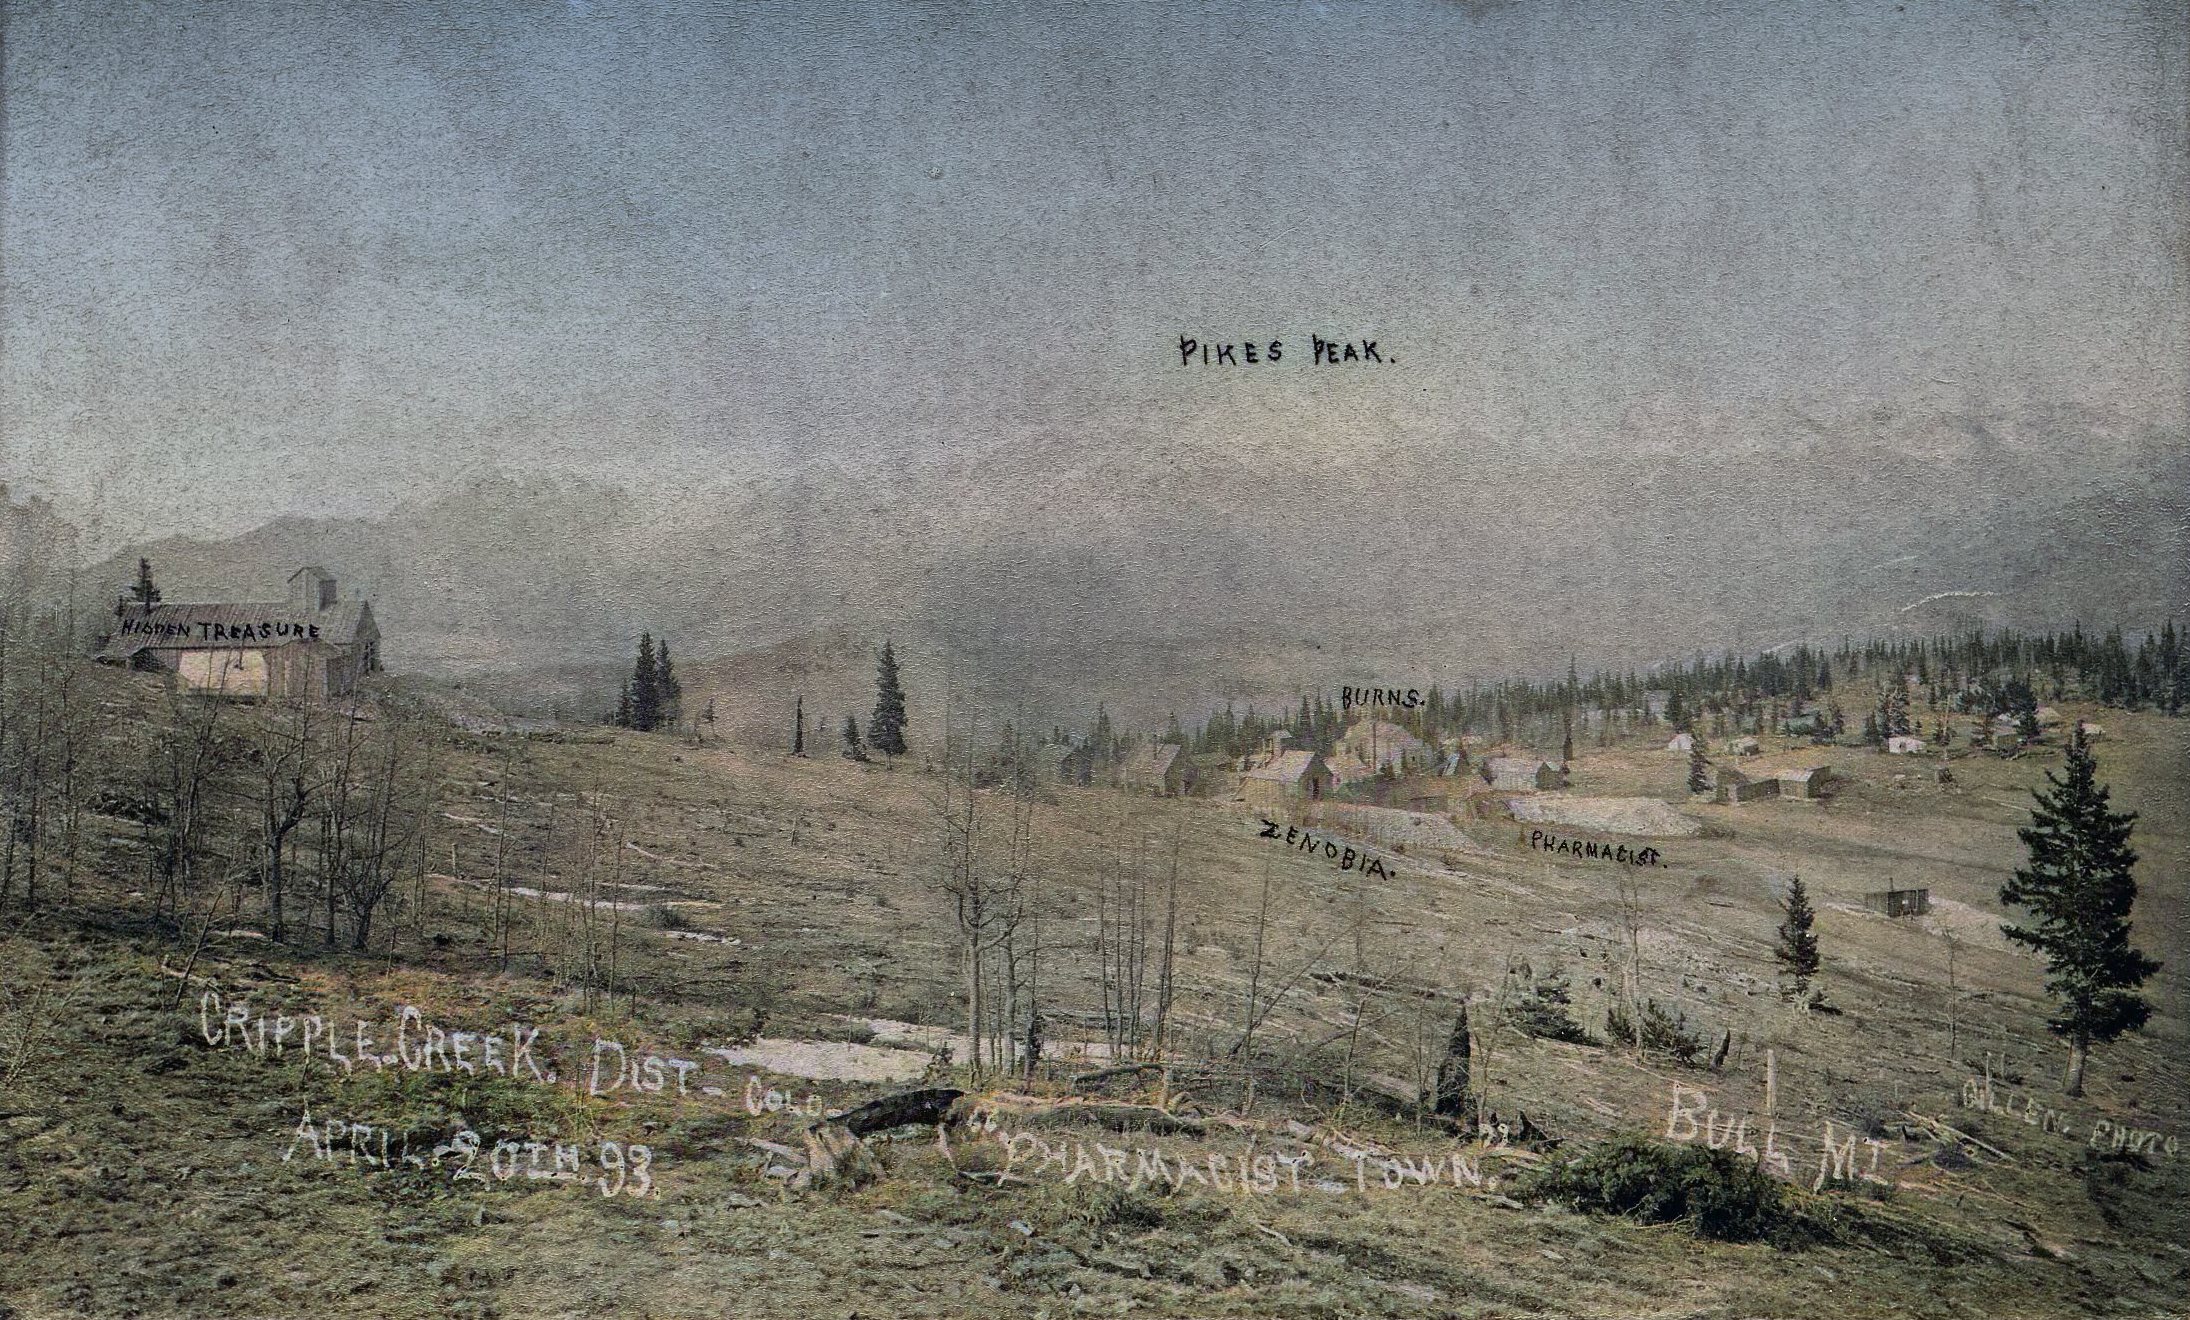 Quite a nice very early view of east side of Bull Hill with some of its mines and the early start of the town of Altman, here called 'Pharmacist Town,' while Bull Hill is called Bull Mountain. Taken April 20, 1893 it feels like a treasure to have, flaws and all!
   Near left-hand side the early Shaft house of the Hidden Treasure Mine is seen, while further downhill, the Zenobia, Pharmacist and Burns Shaft houses are marked out, thankfully. There are more mines, but they are not marked out. 
   I did procure the colored version of this image. Source was grayish, or in common speech black & white. Used an online service and tweaked and worked with image to get what looks best to my eyes at the moment. Source had flaws, somewhat faded, ridges on the photo itself, and it was impossible to bring forward the Pikes Peak Range, but in the end, I worked over it as best as I could.